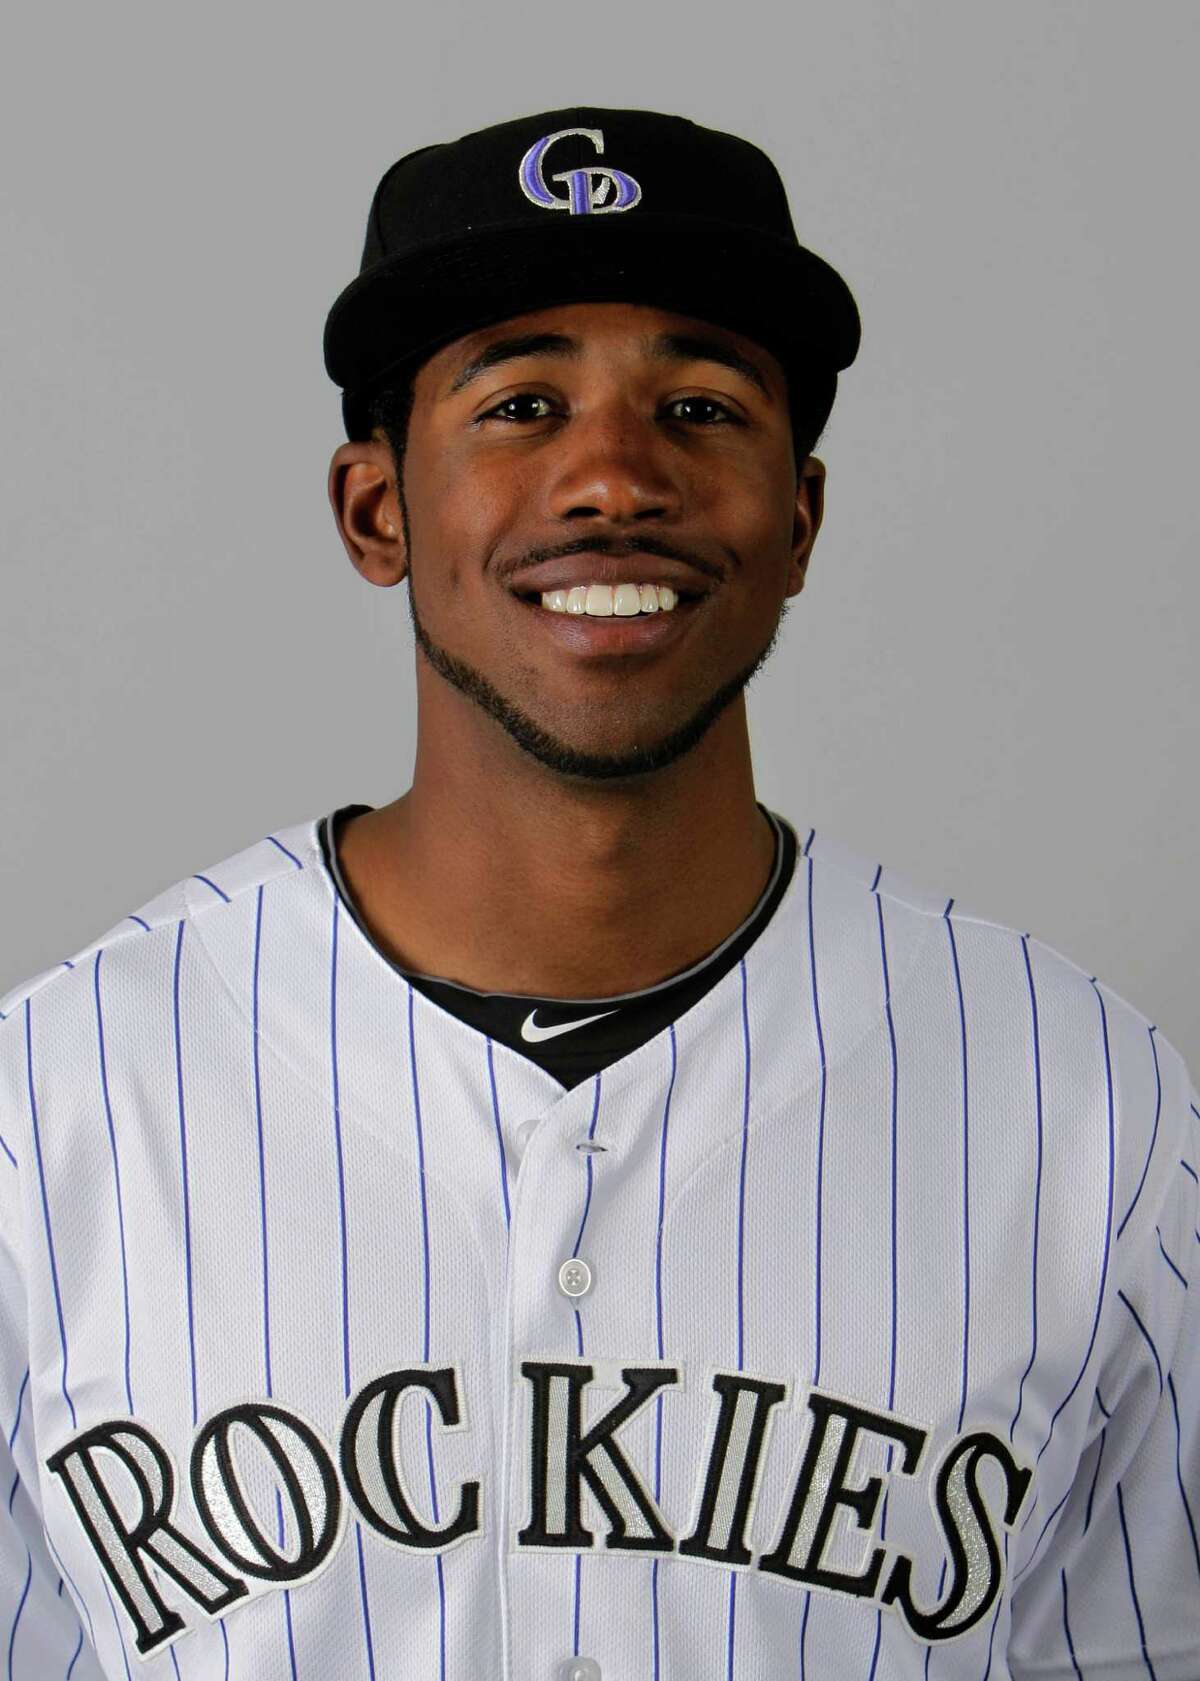 This is a 2011 photo of outfielder Dexter Fowler of the Colorado Rockies baseball team. This image reflects the Colorado Rockies active roster as of Thursday, Feb. 24, 2011 when this image was taken. (AP Photo/Mark Duncan)